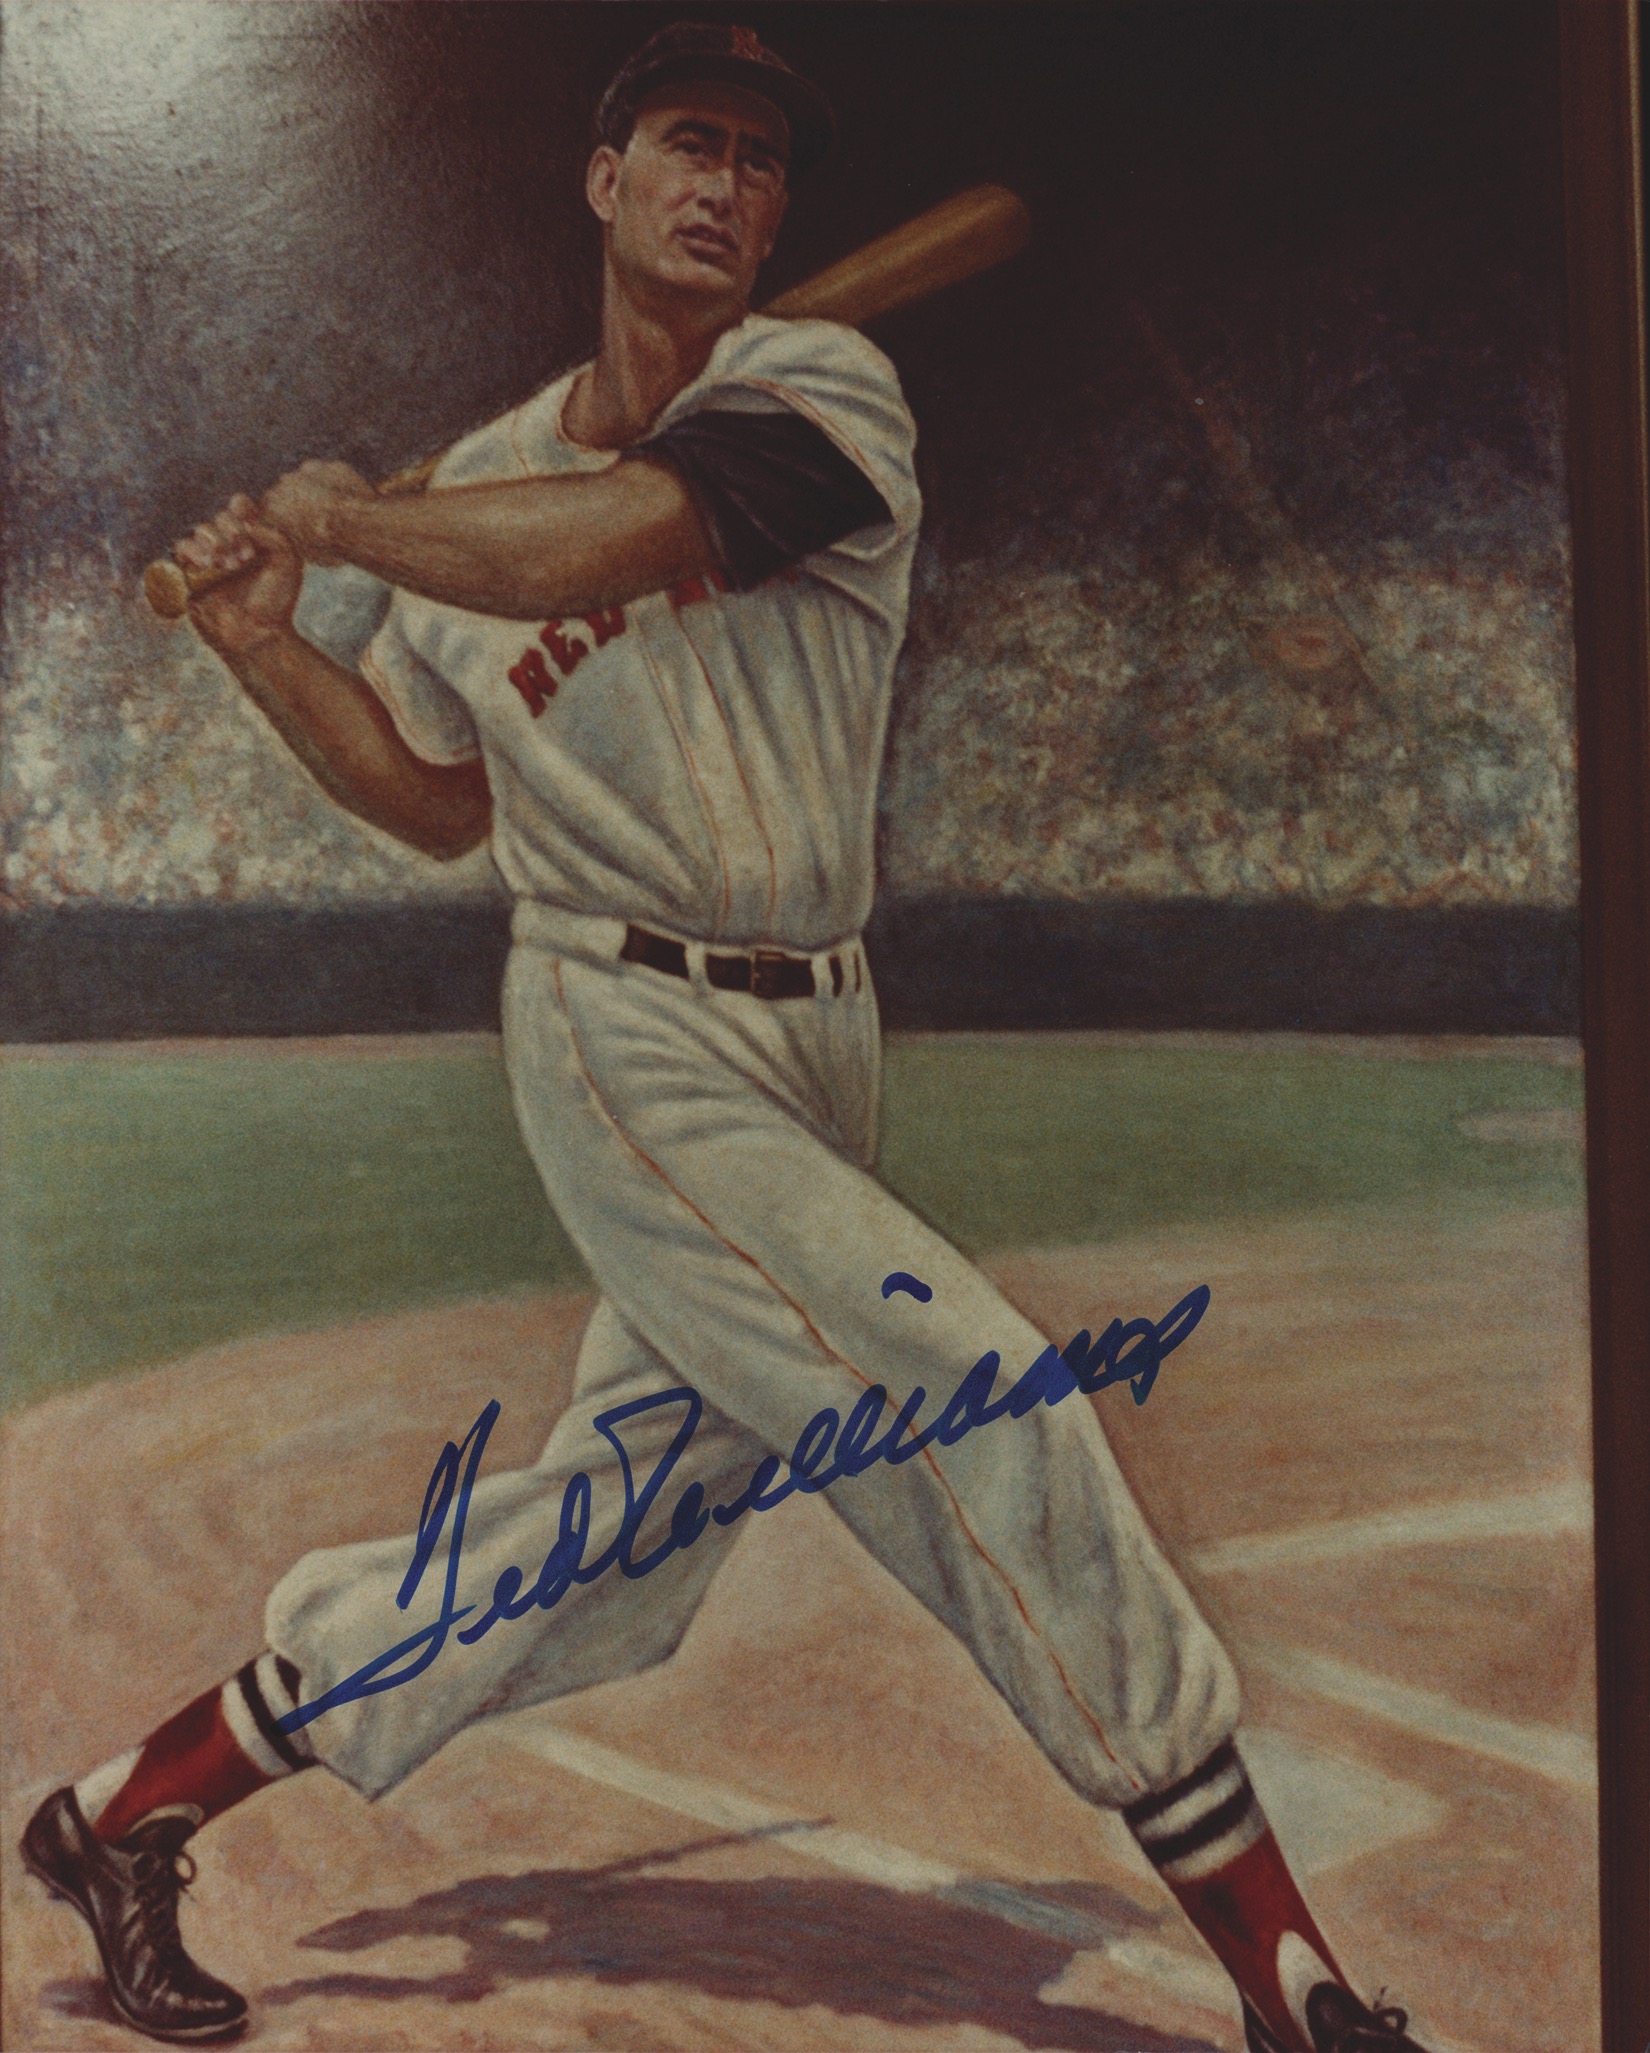 Lot #938 Ted Williams Signed Photograph - Image 1